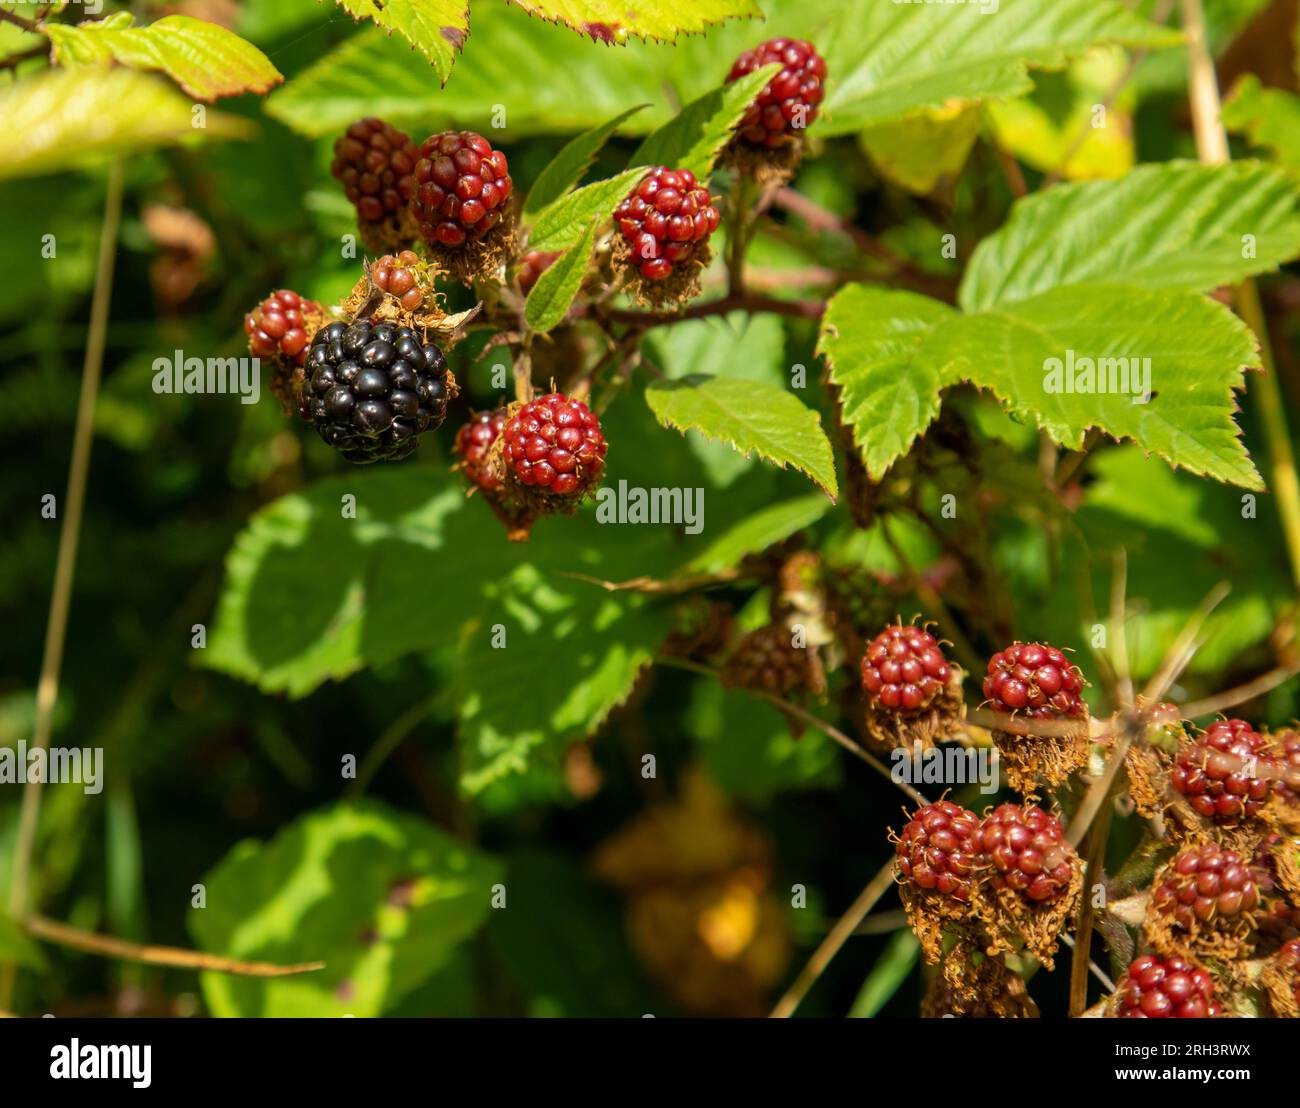 Brambles, wild berries, growing in the countryside, ripe ready to be picked and eaten.  Lovely fresh fruit to eat Stock Photo